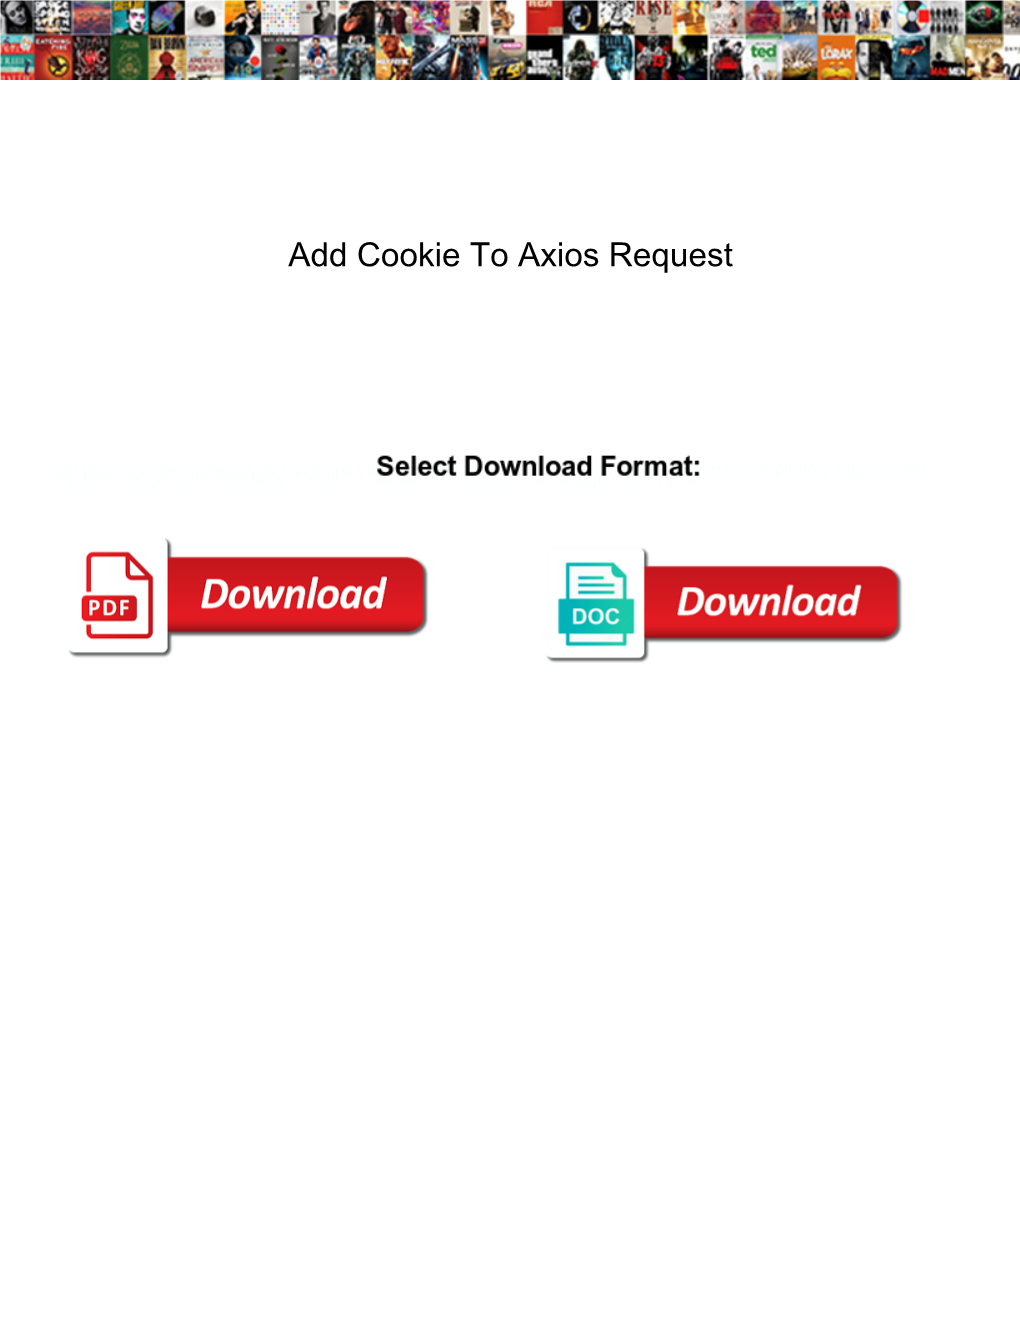 Add Cookie to Axios Request